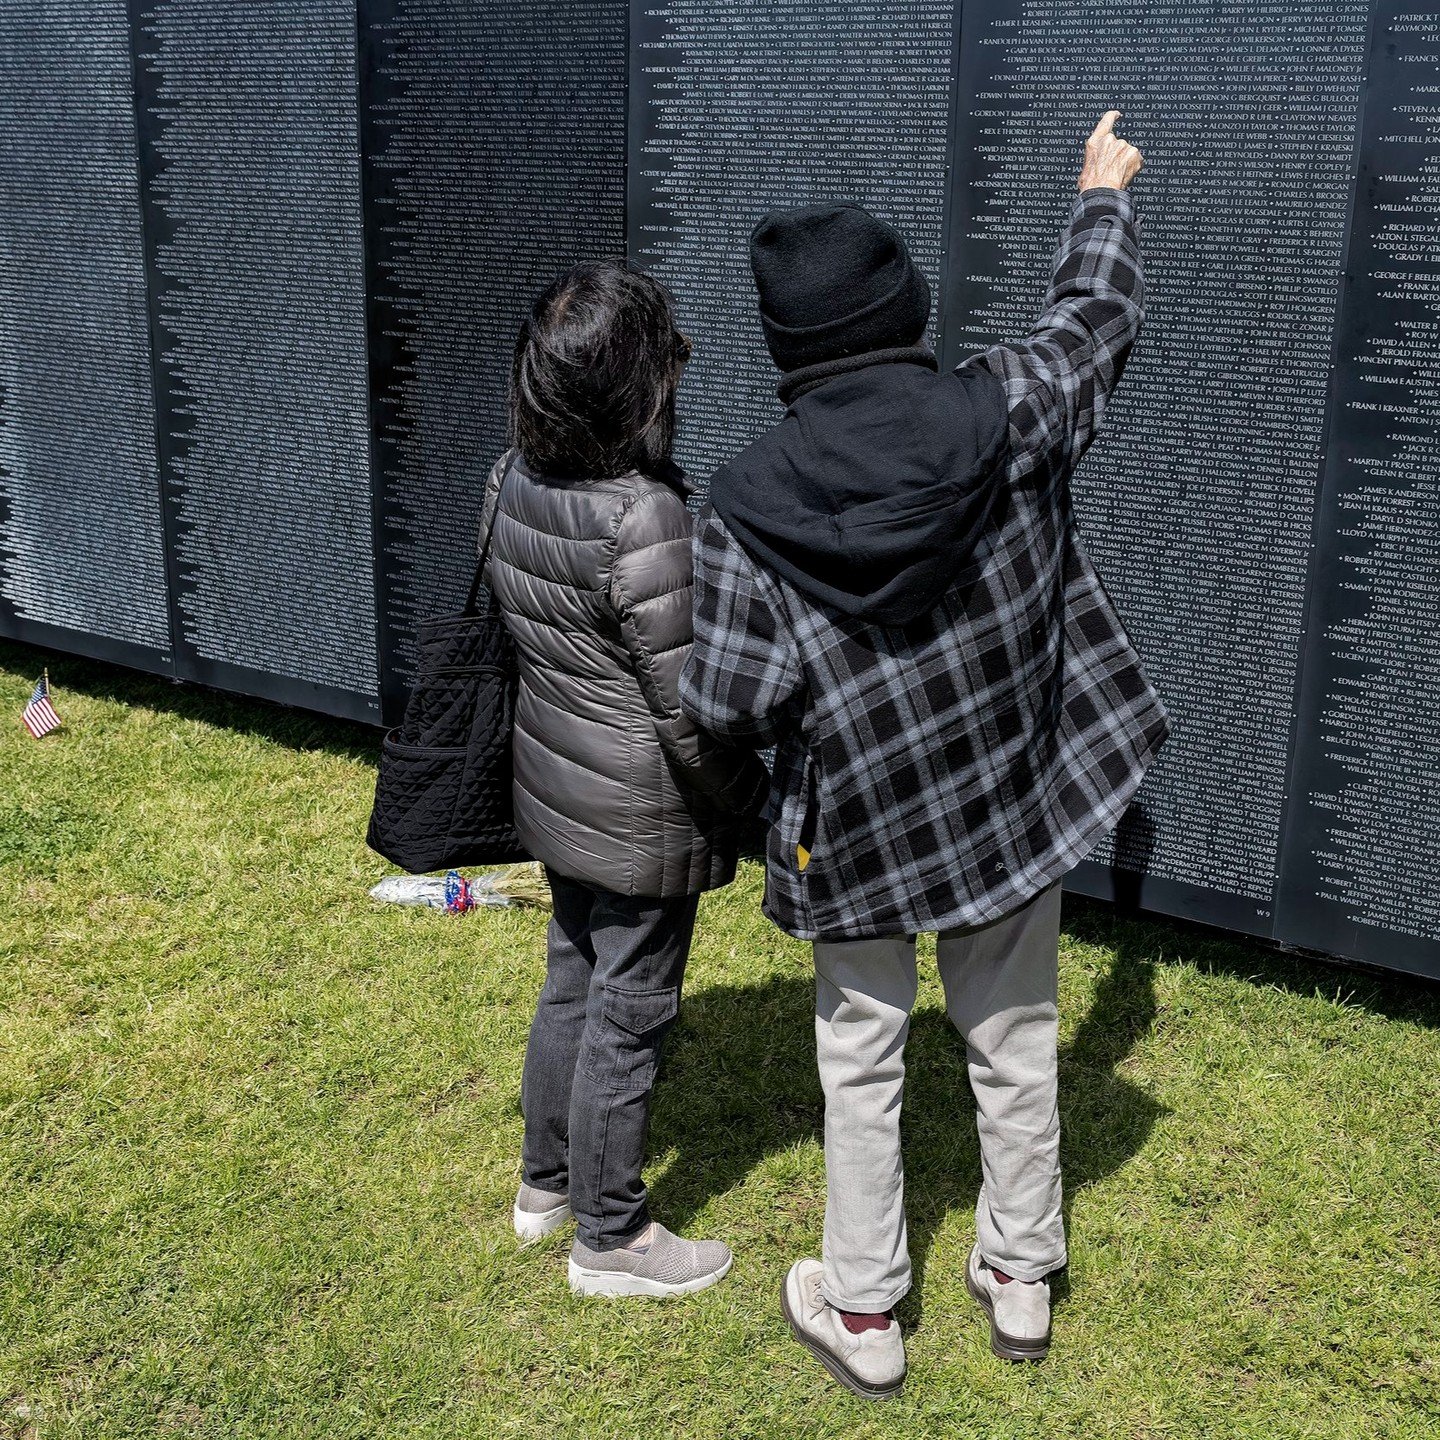 Take a Tour Around the Vietnam Wall of Remembrance with Steve Tabor, Right Here in Gardena and Serving the South Bay, Greater Los Angeles. 

https://www.palosverdespulse.com/blog/vietnamveteransmemorialwall#pv#peninsula#rancho#coastal#living#southbay